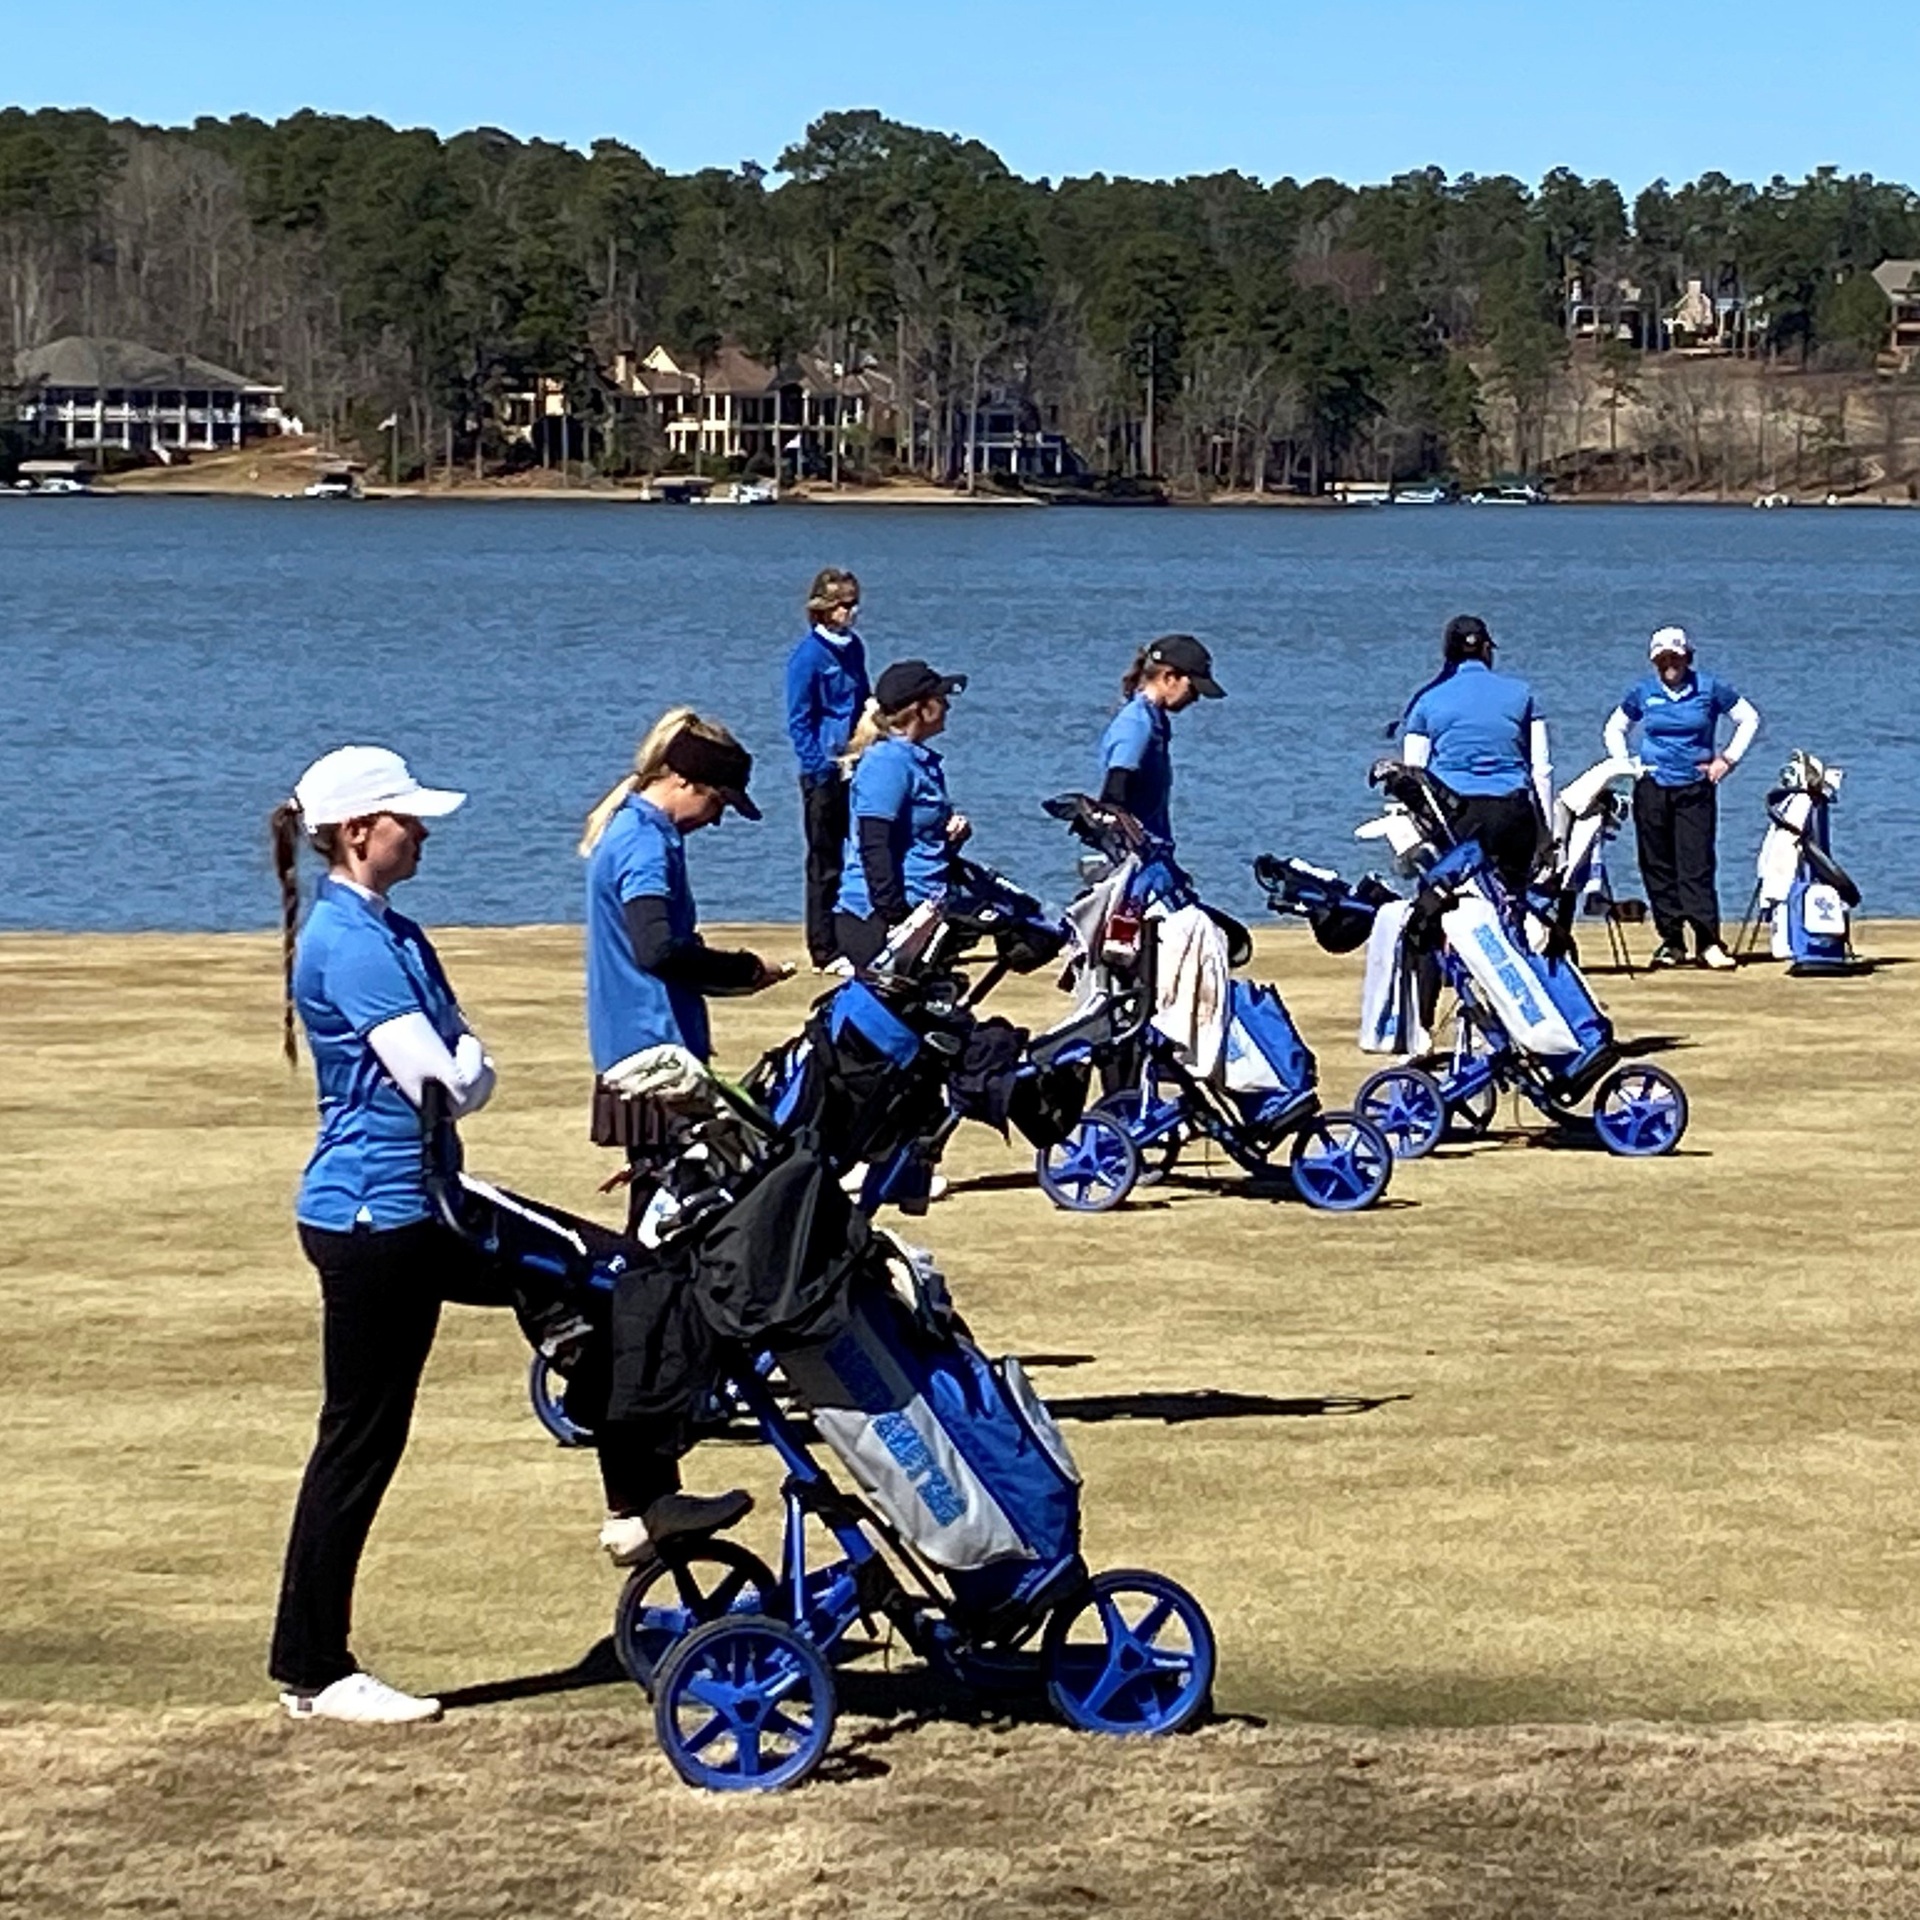 LADY FALCONS COMPETE AT GREAT WATERS OCONEE INVITATIONAL